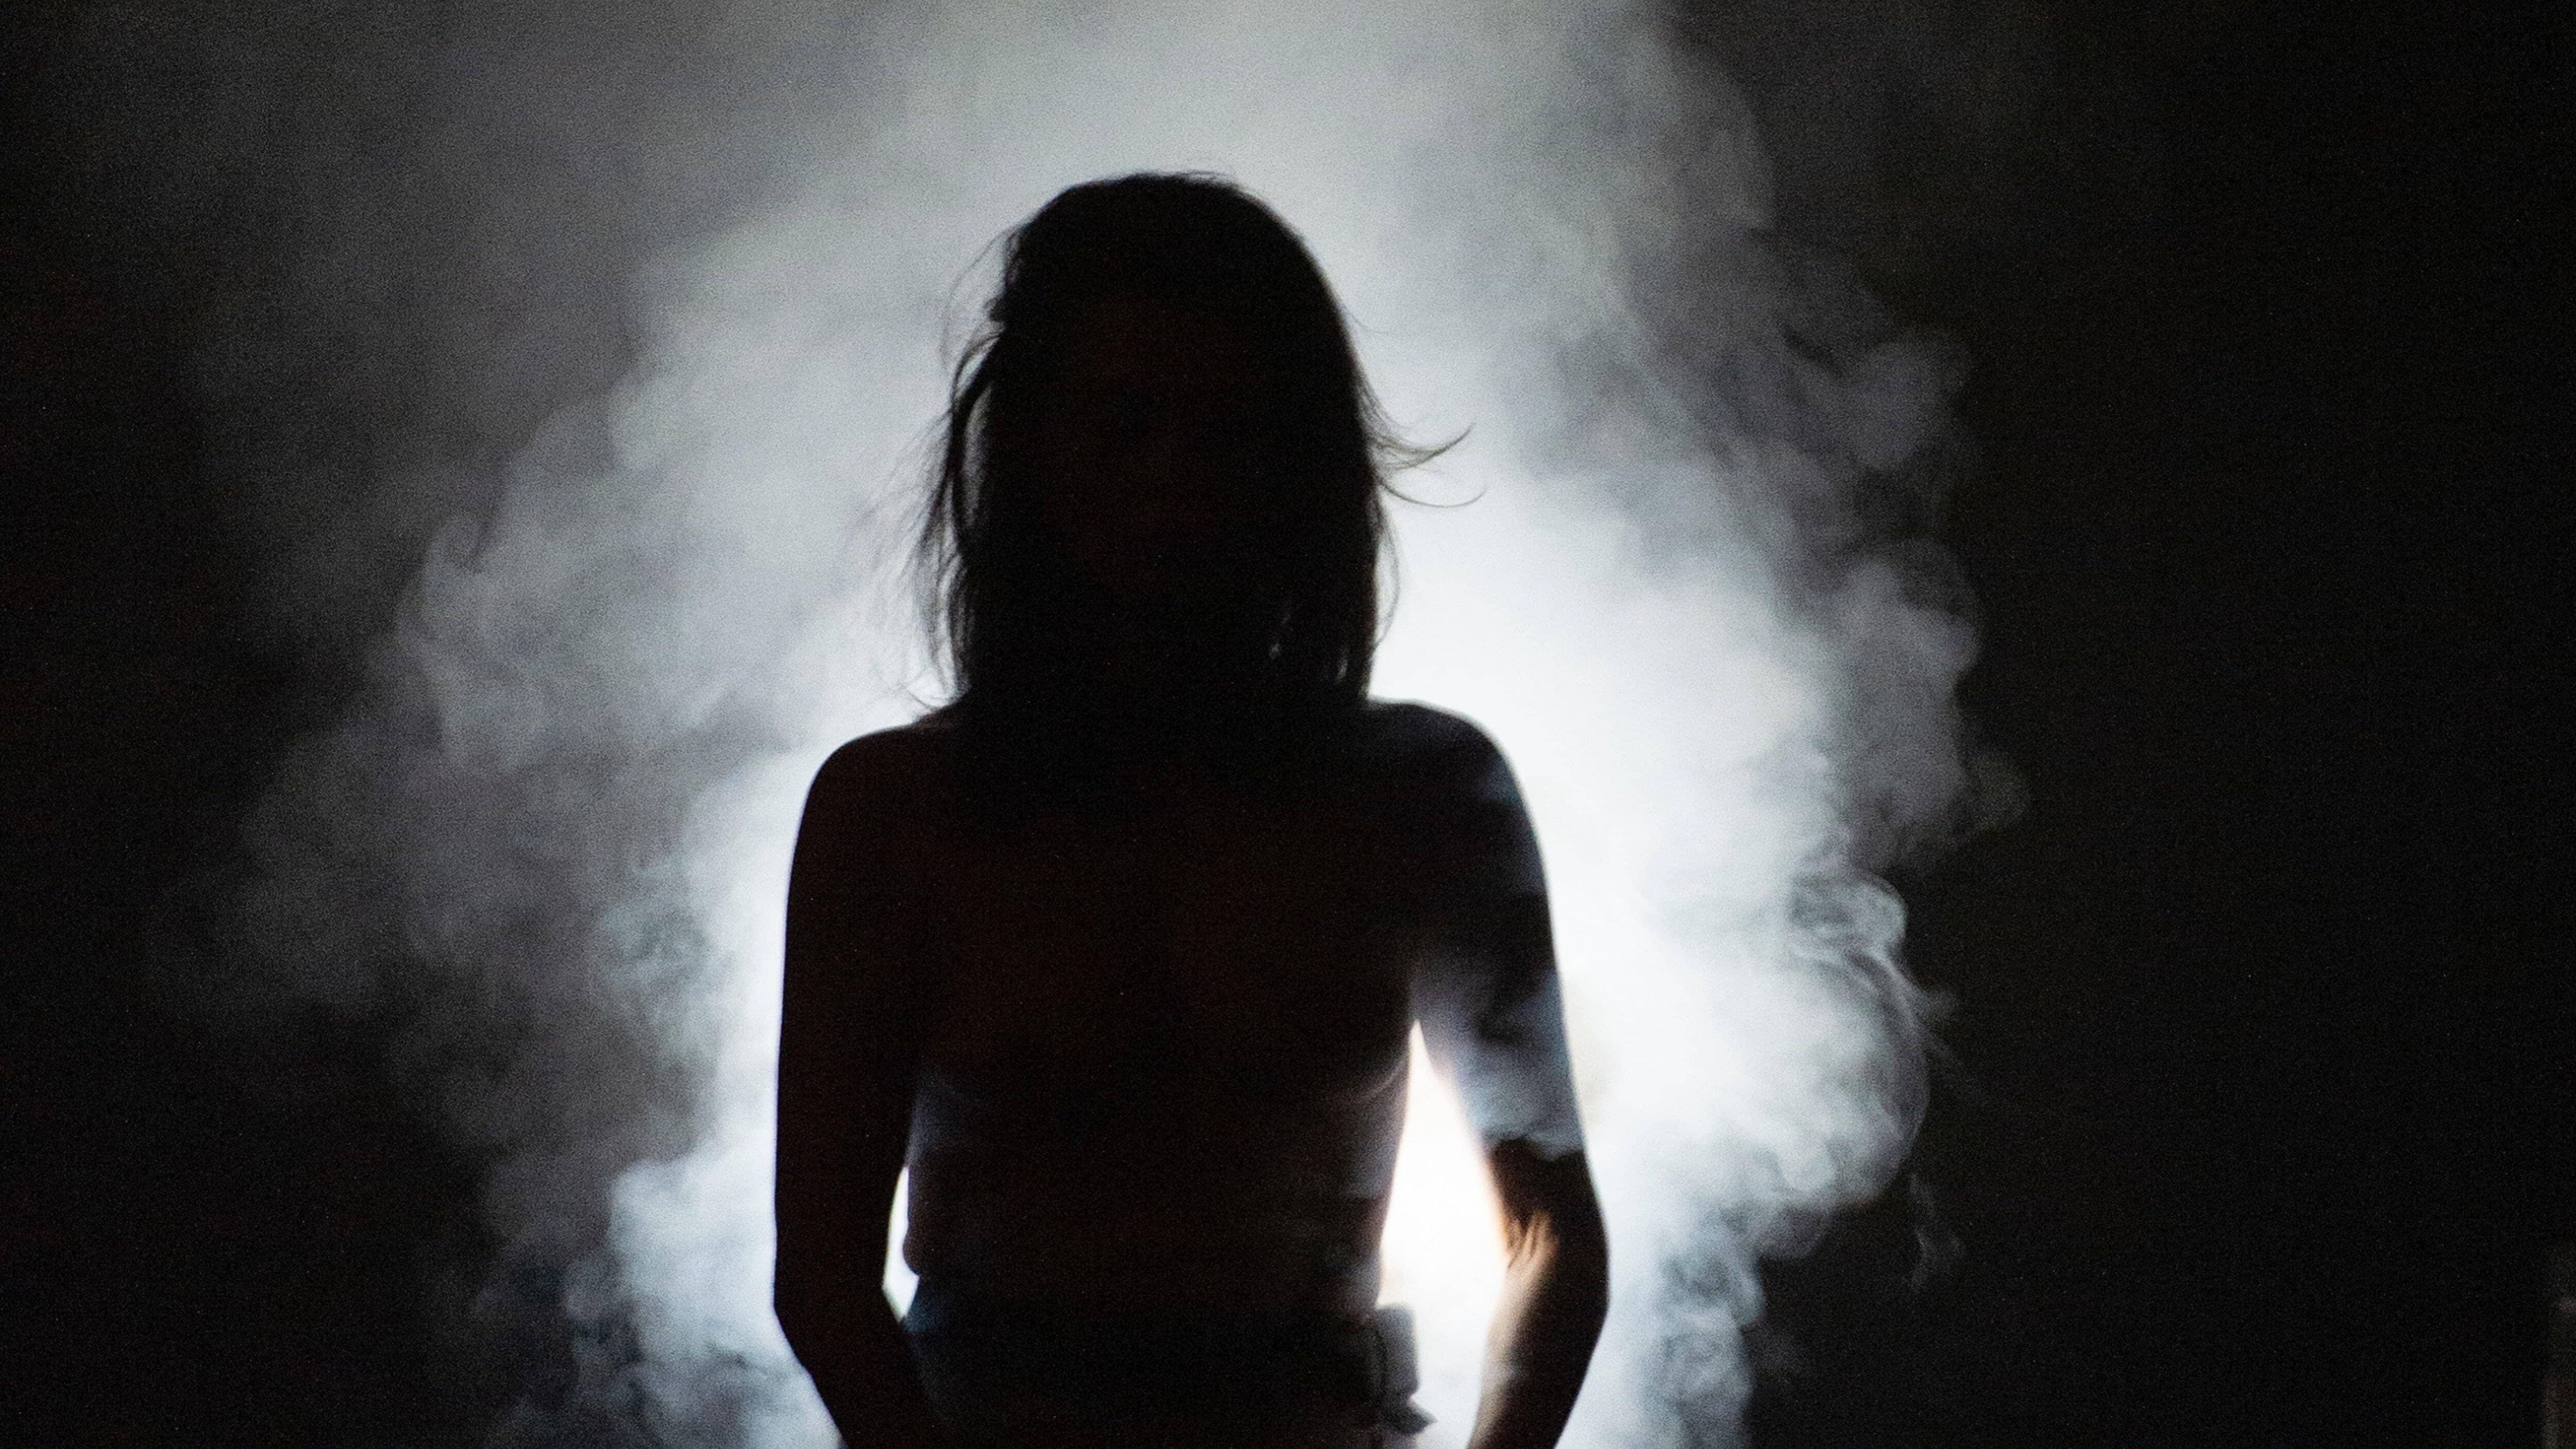 Smoke cloud on stage in Nuée by Emmanuelle Huynh